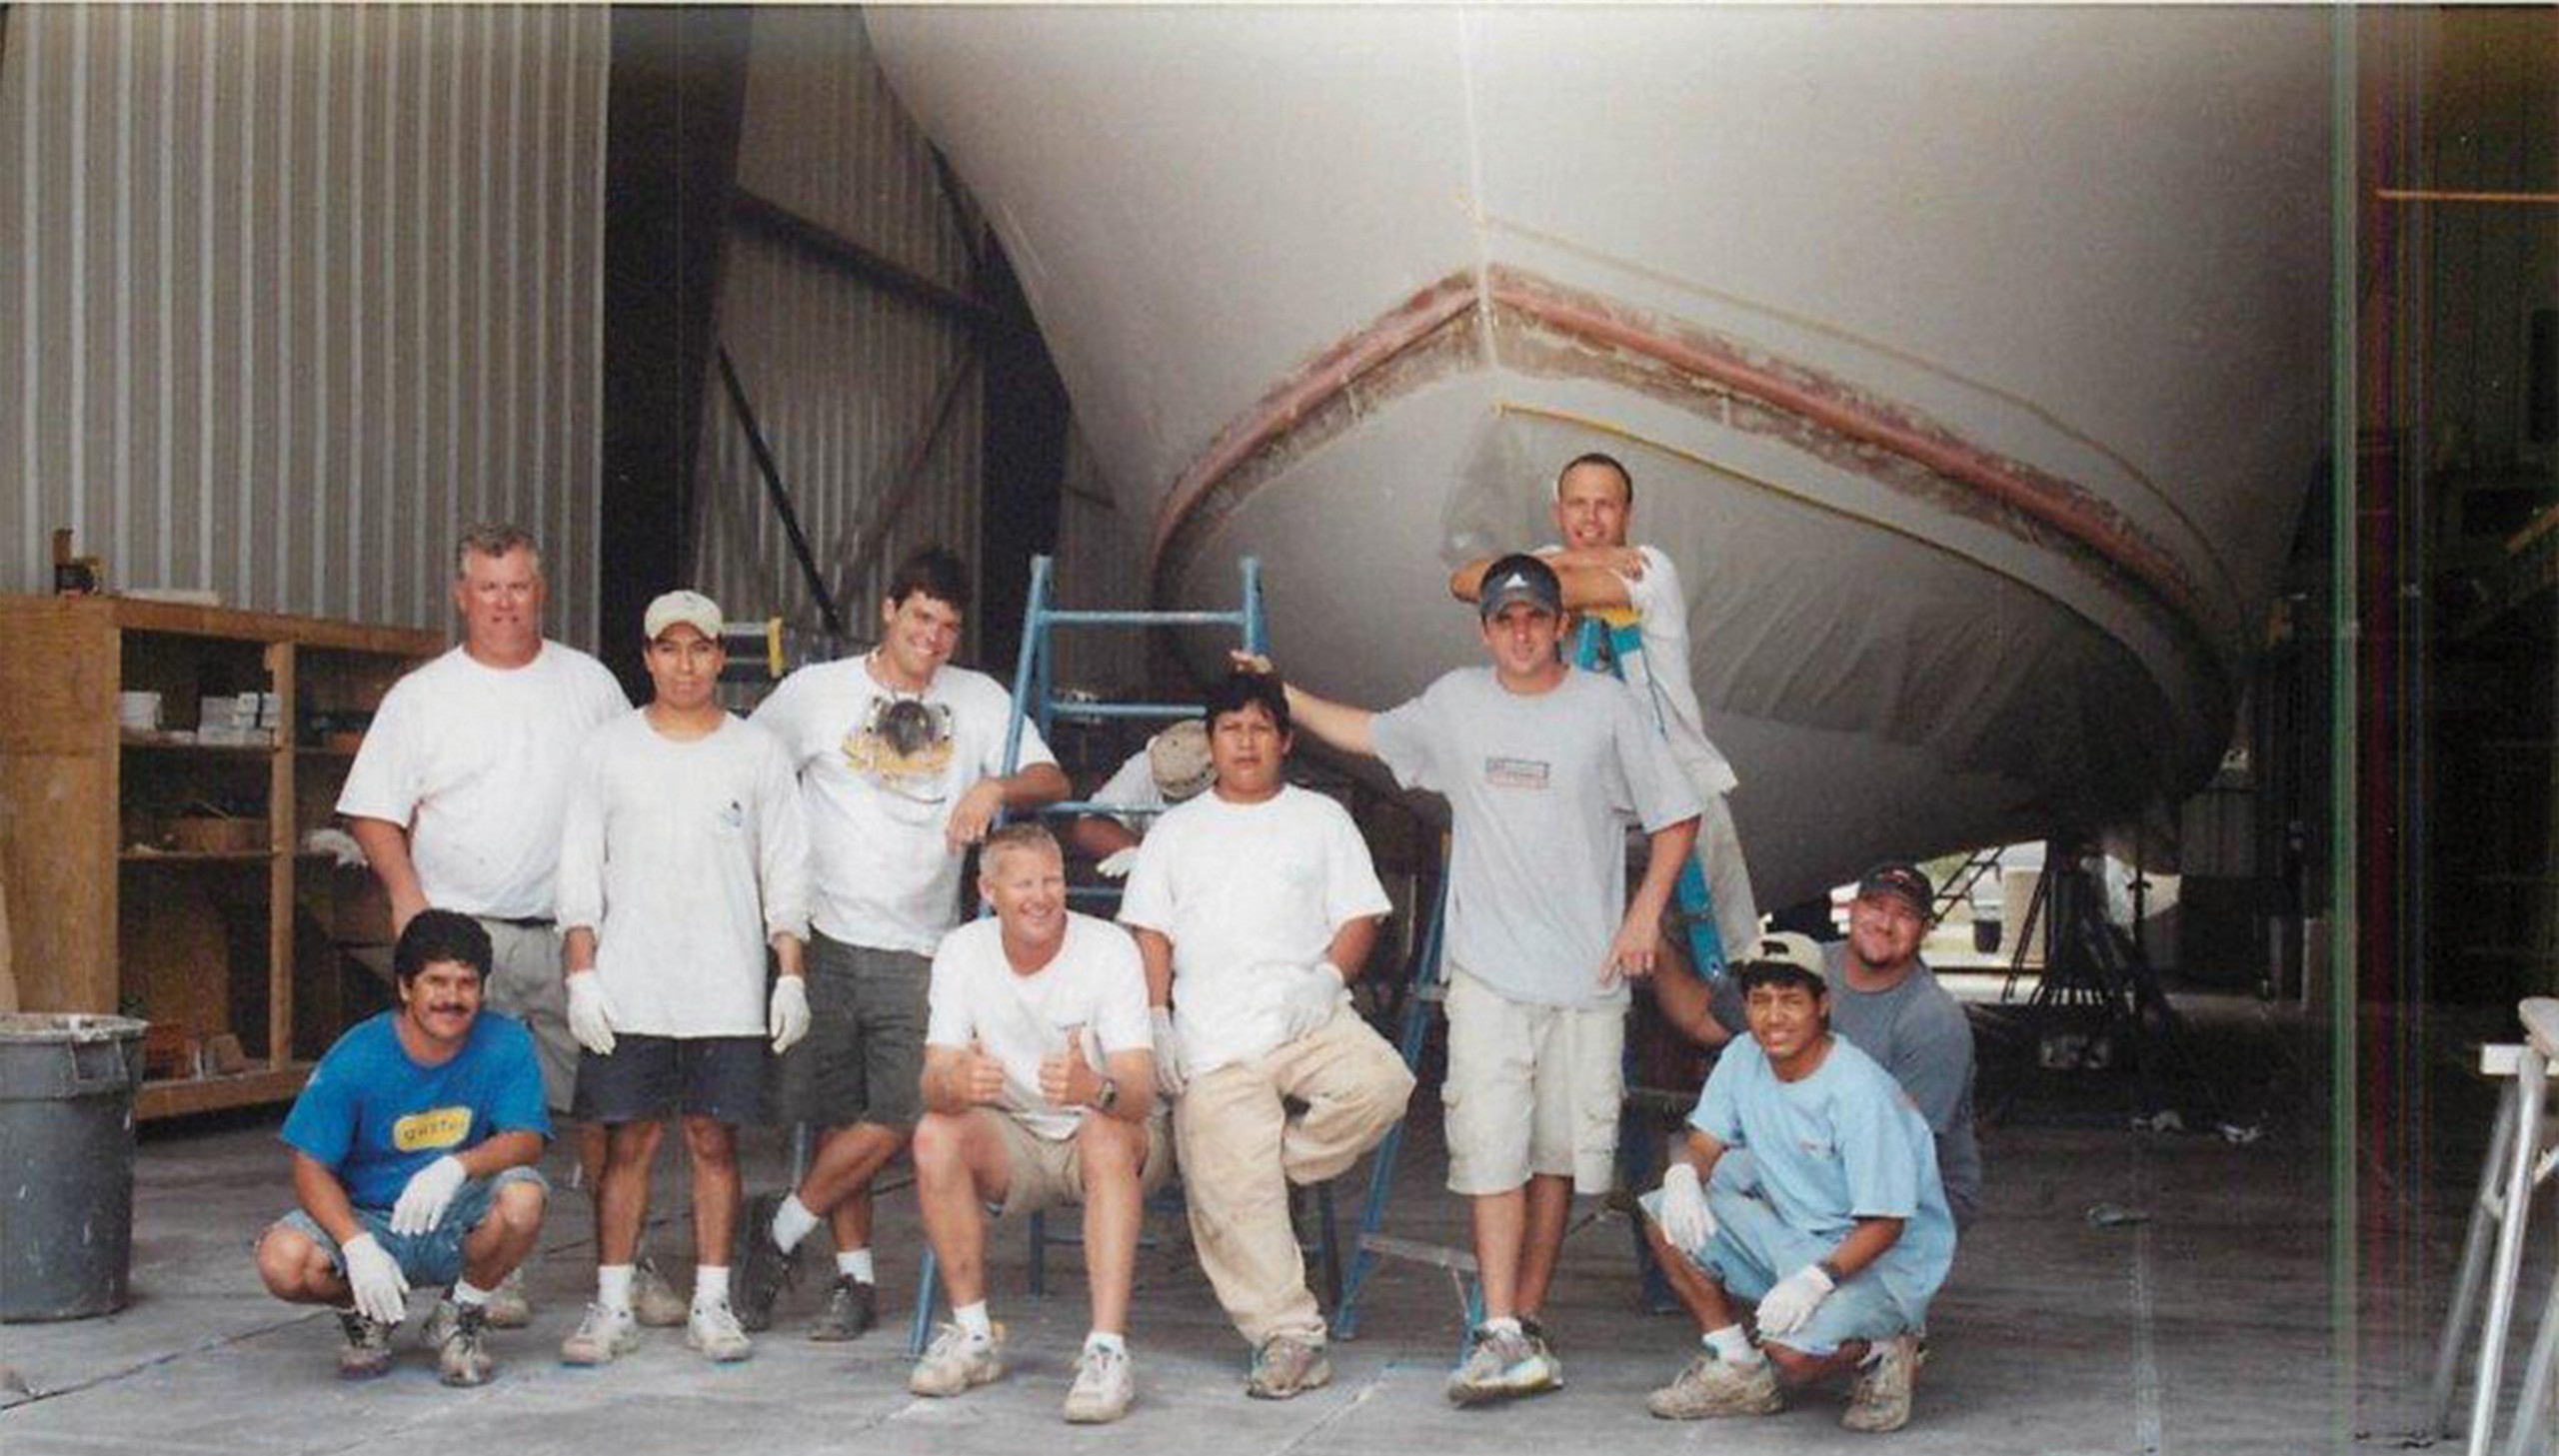 Bayliss Boatworks workers stopping work for a picture in front of a boat bow in a build shed